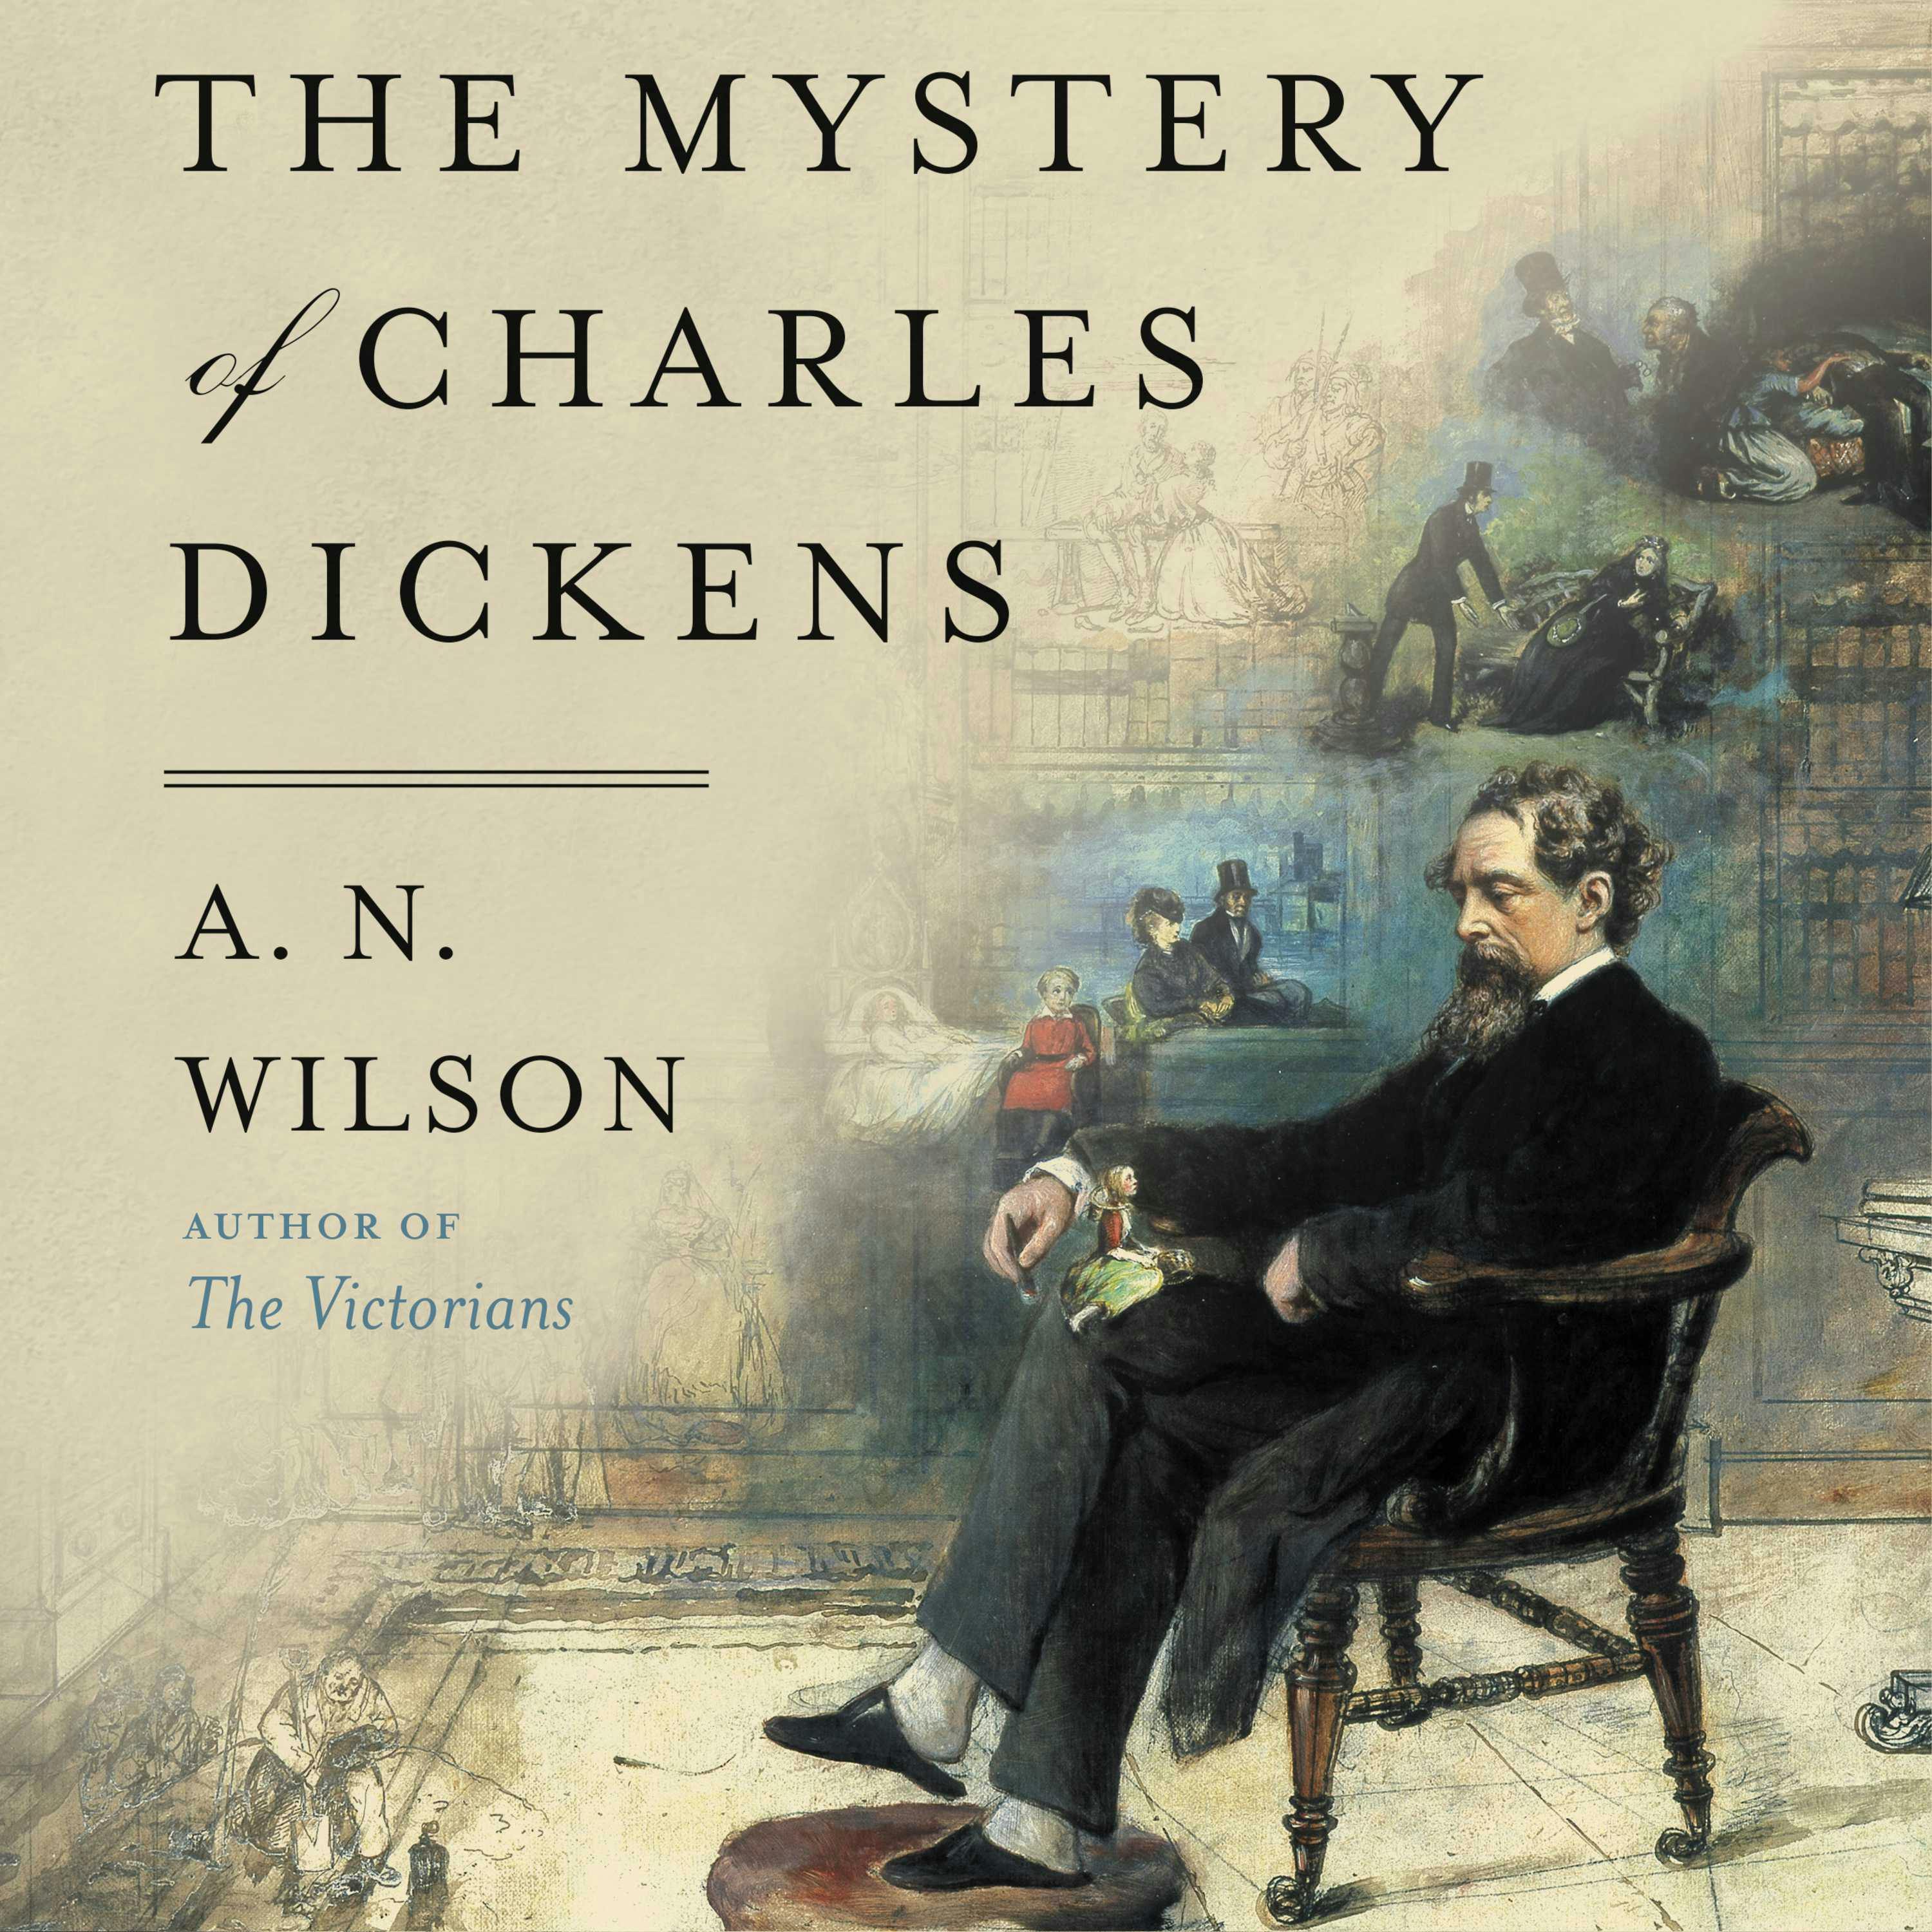 The Mystery of Charles Dickens - A.N. Wilson